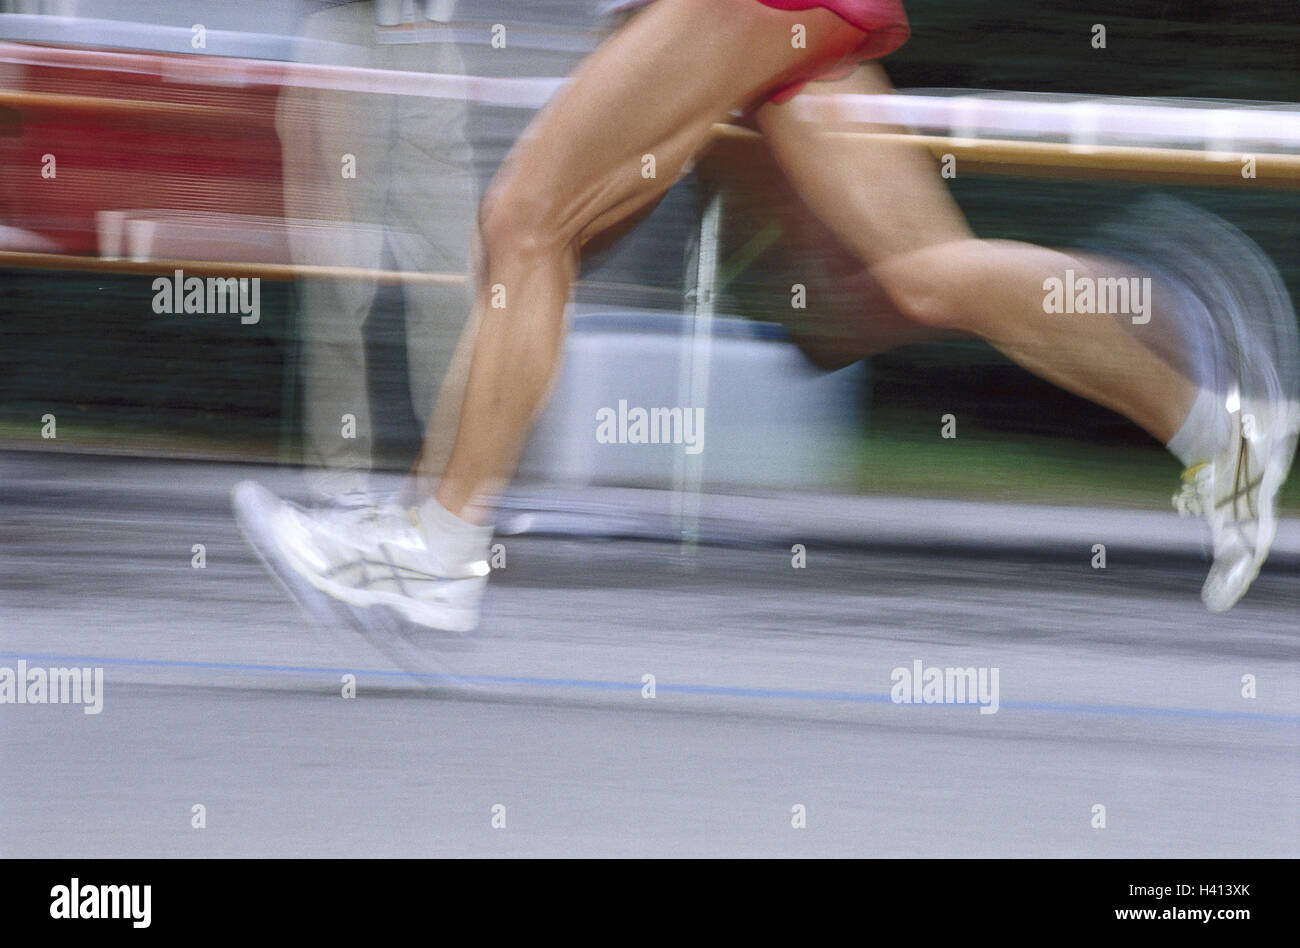 Woman, run, side view, detail, feet, motion blur, women's feet, sportswoman, sport, sport, running, run, motion, activity, fitness, fit, actively, sprint, sprint, gain quickness, speed, strain, overfatigue, perseverance, power, training, running, there wi Stock Photo